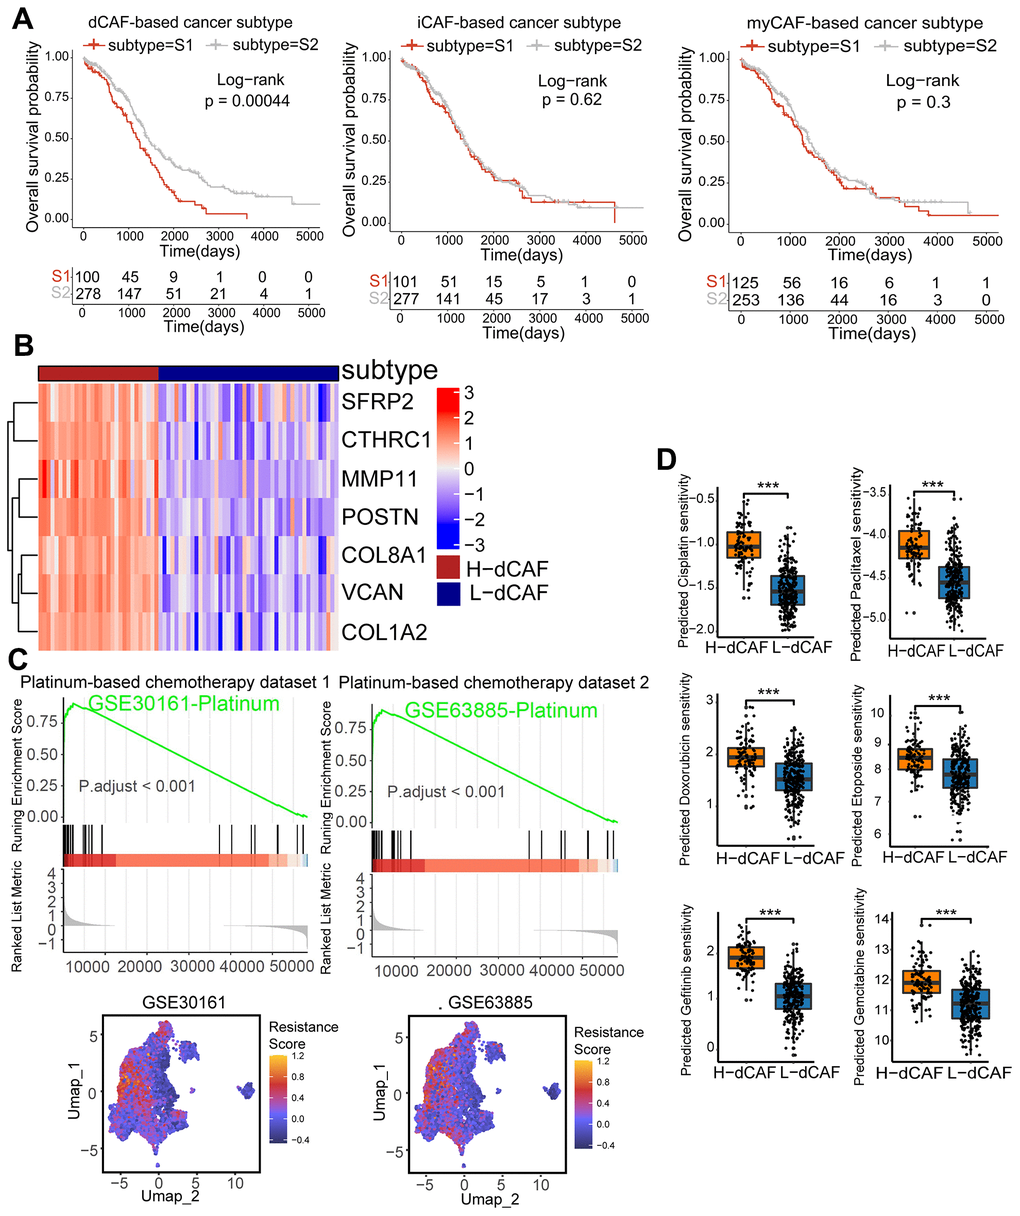 dCAFs were related to prognosis and platinum response in OC. (A) KM survival analysis of CAF-based cancer subtypes. (B) The expression level of dCAF marker genes in dCAF-based cancer subtypes. (C) GSEA of GSE30161- and GSE63885-derived platinum resistance gene in dCAF-based cancer subtypes. Feature plot of these genes in stromal cells. (D) IC50 of drugs including cisplatin, paclitaxel, gemcitabine, gefitinib, doxorubicin, and etoposide in dCAF-based cancer subtypes, calculated by pRRophetic algorithm. (***p p p 